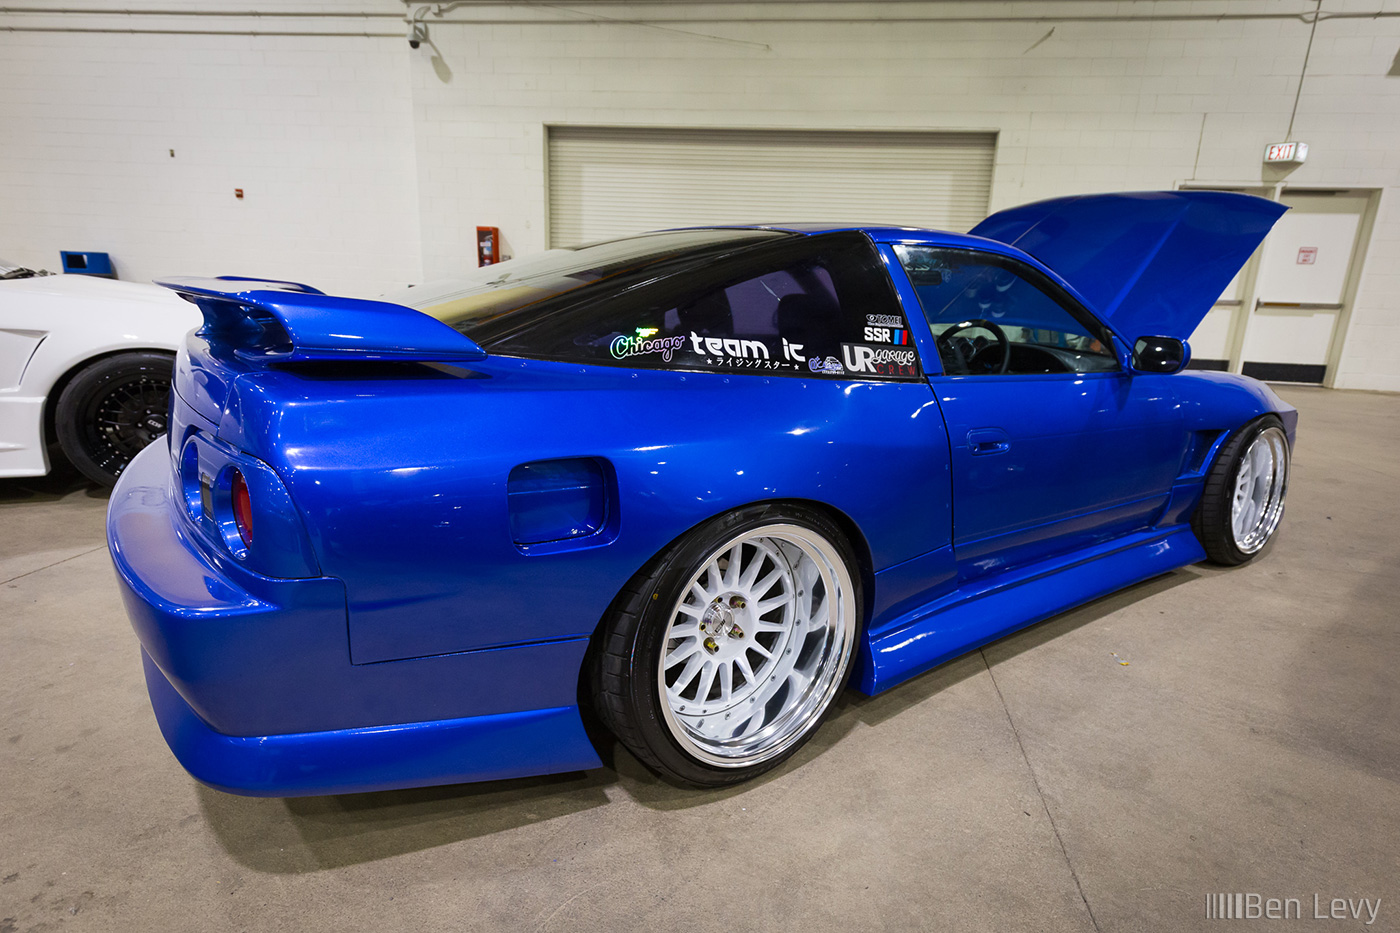 Widebody S13 Nissan with Skyline tails